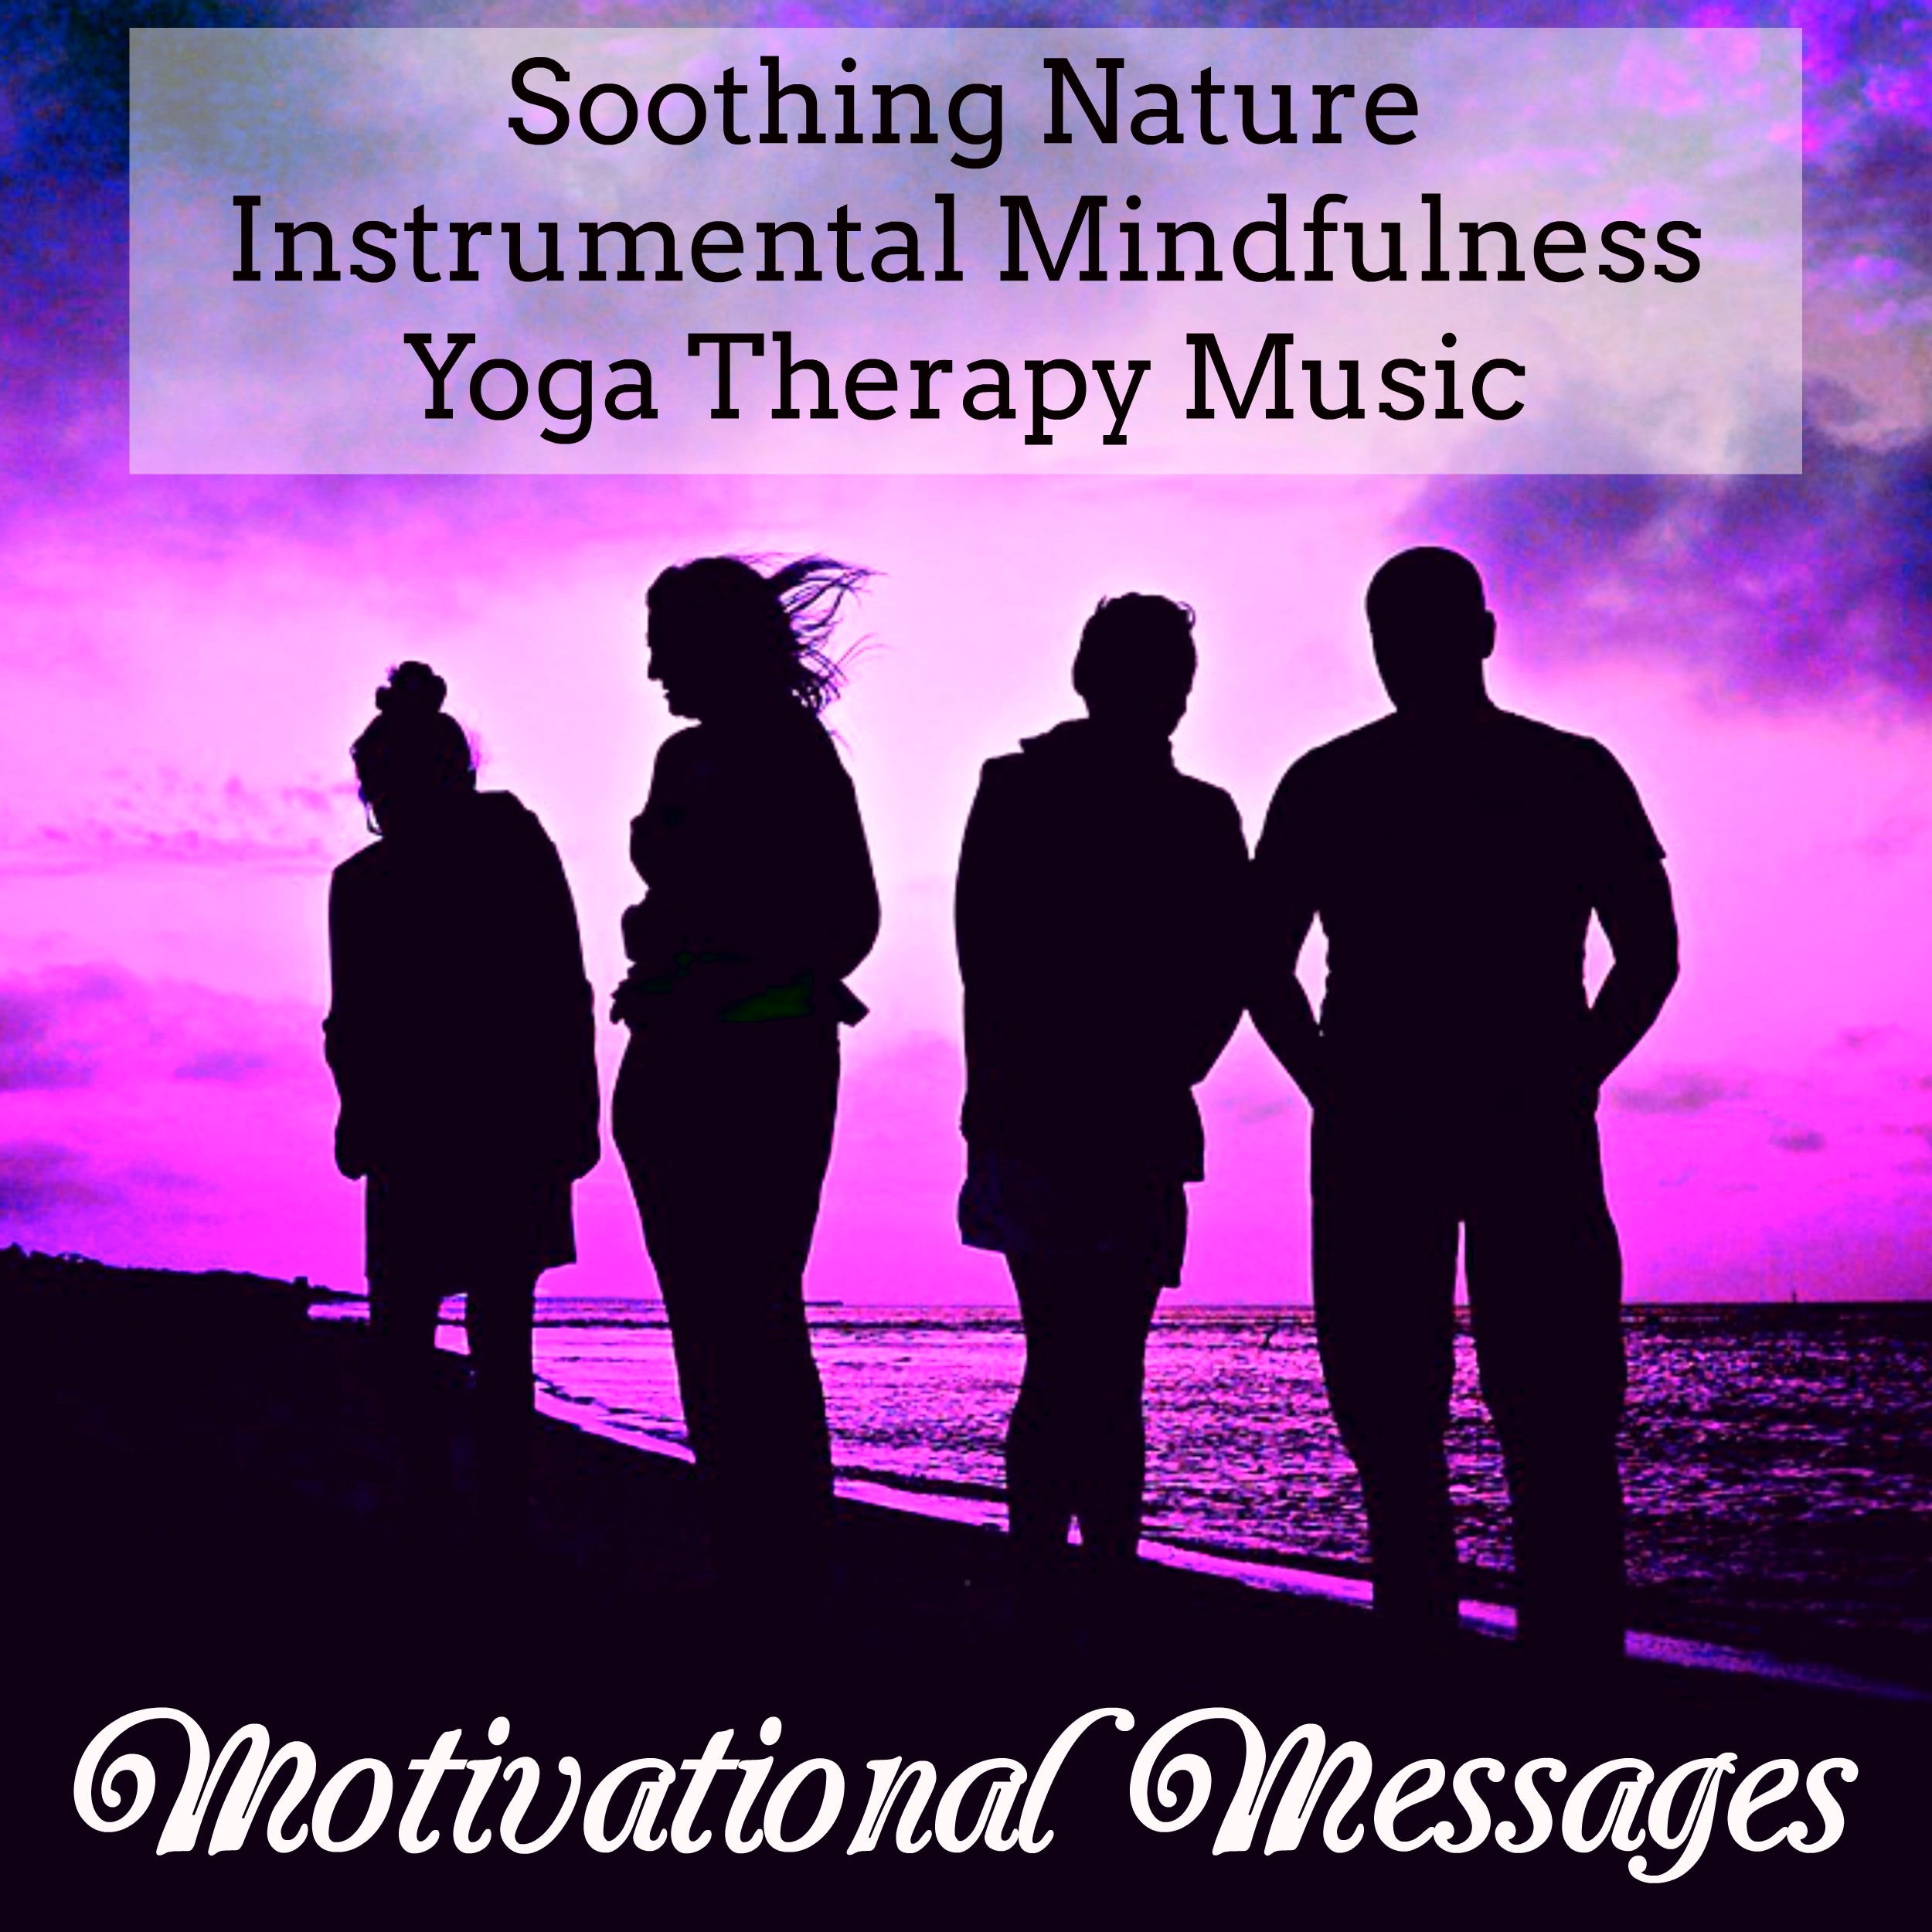 Motivational Messages - Soothing Nature Instrumental Mindfulness Yoga Therapy Music with New Age Binaural Spiritual Sounds